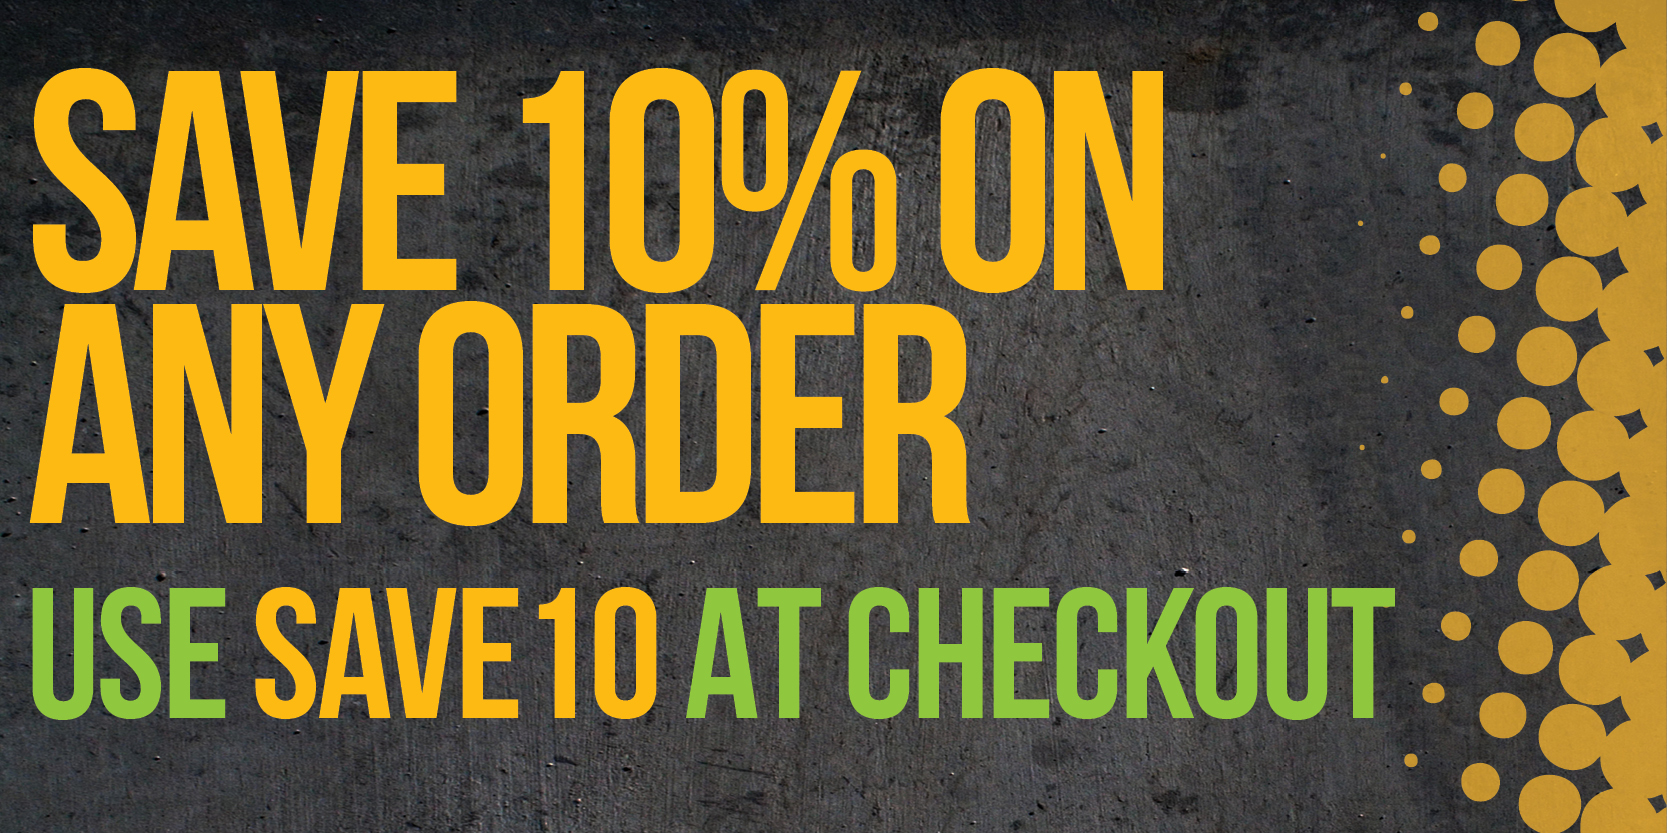 Save 10% on Any Order